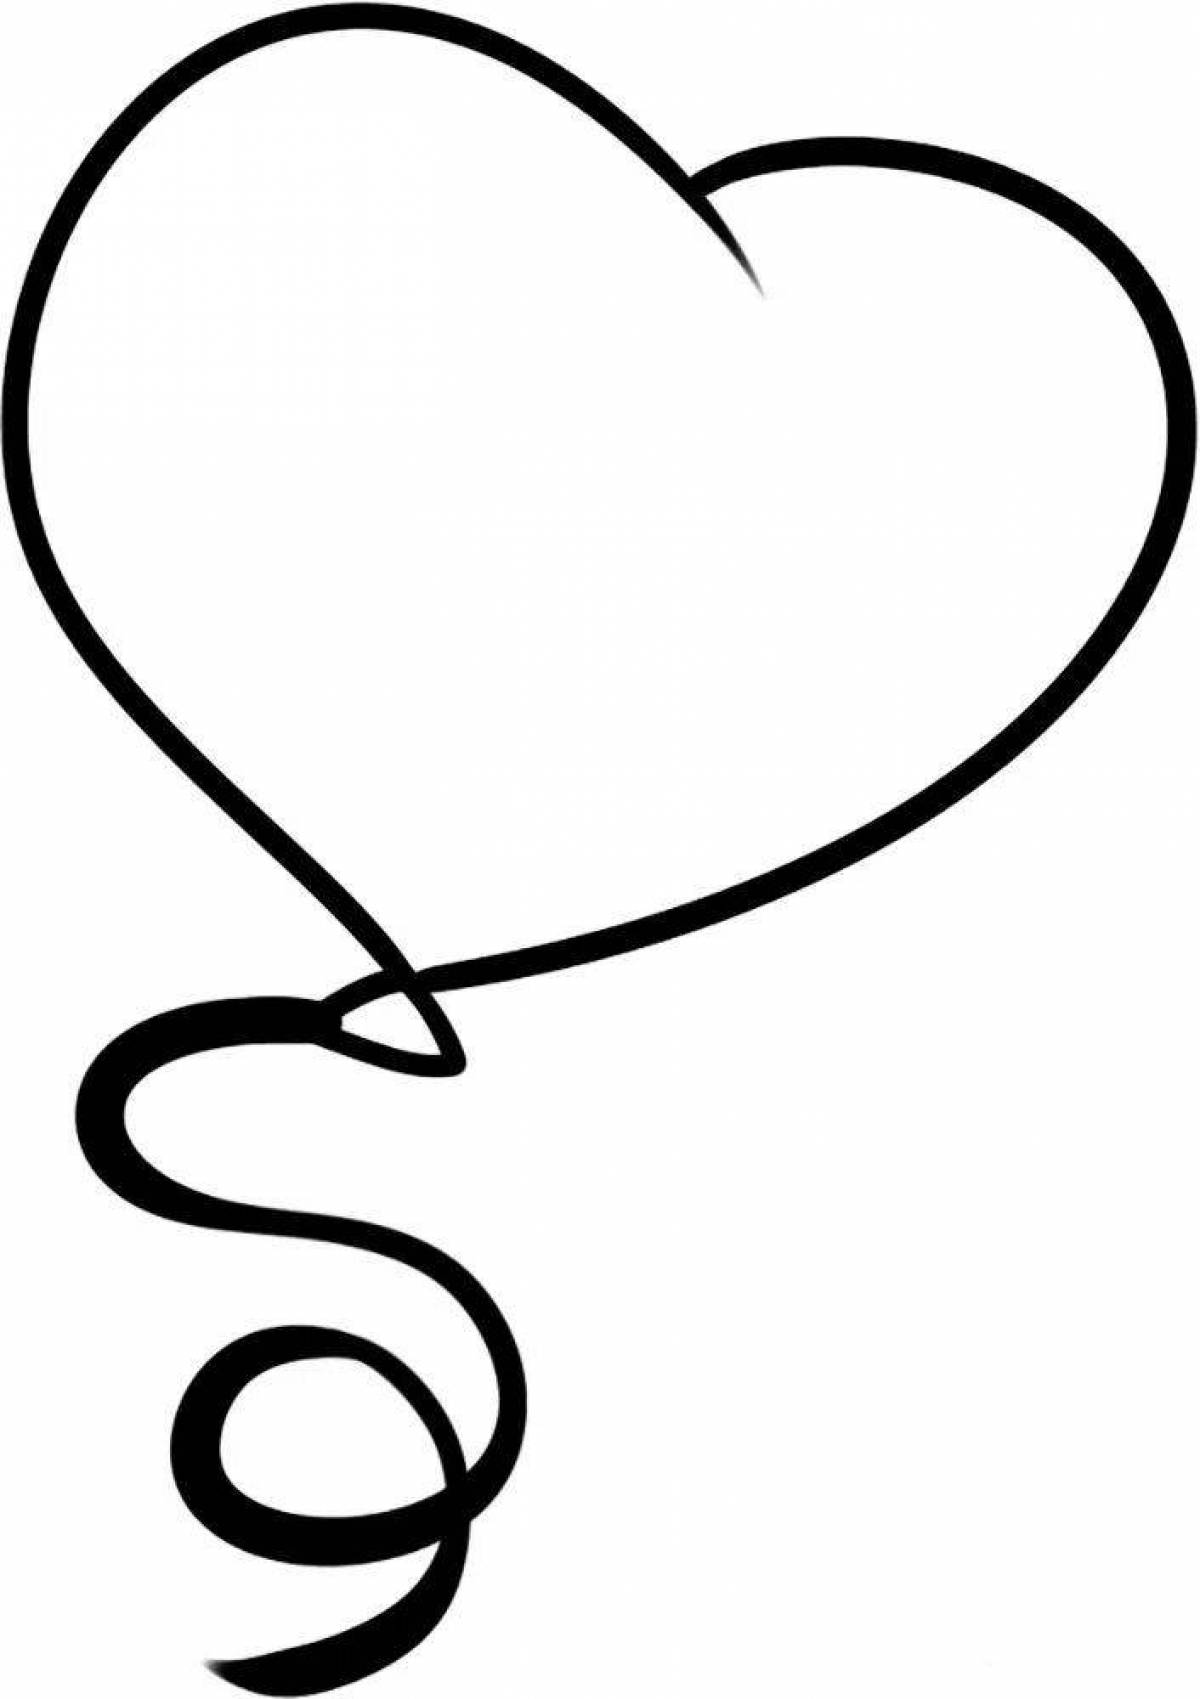 Glowing balloon coloring page